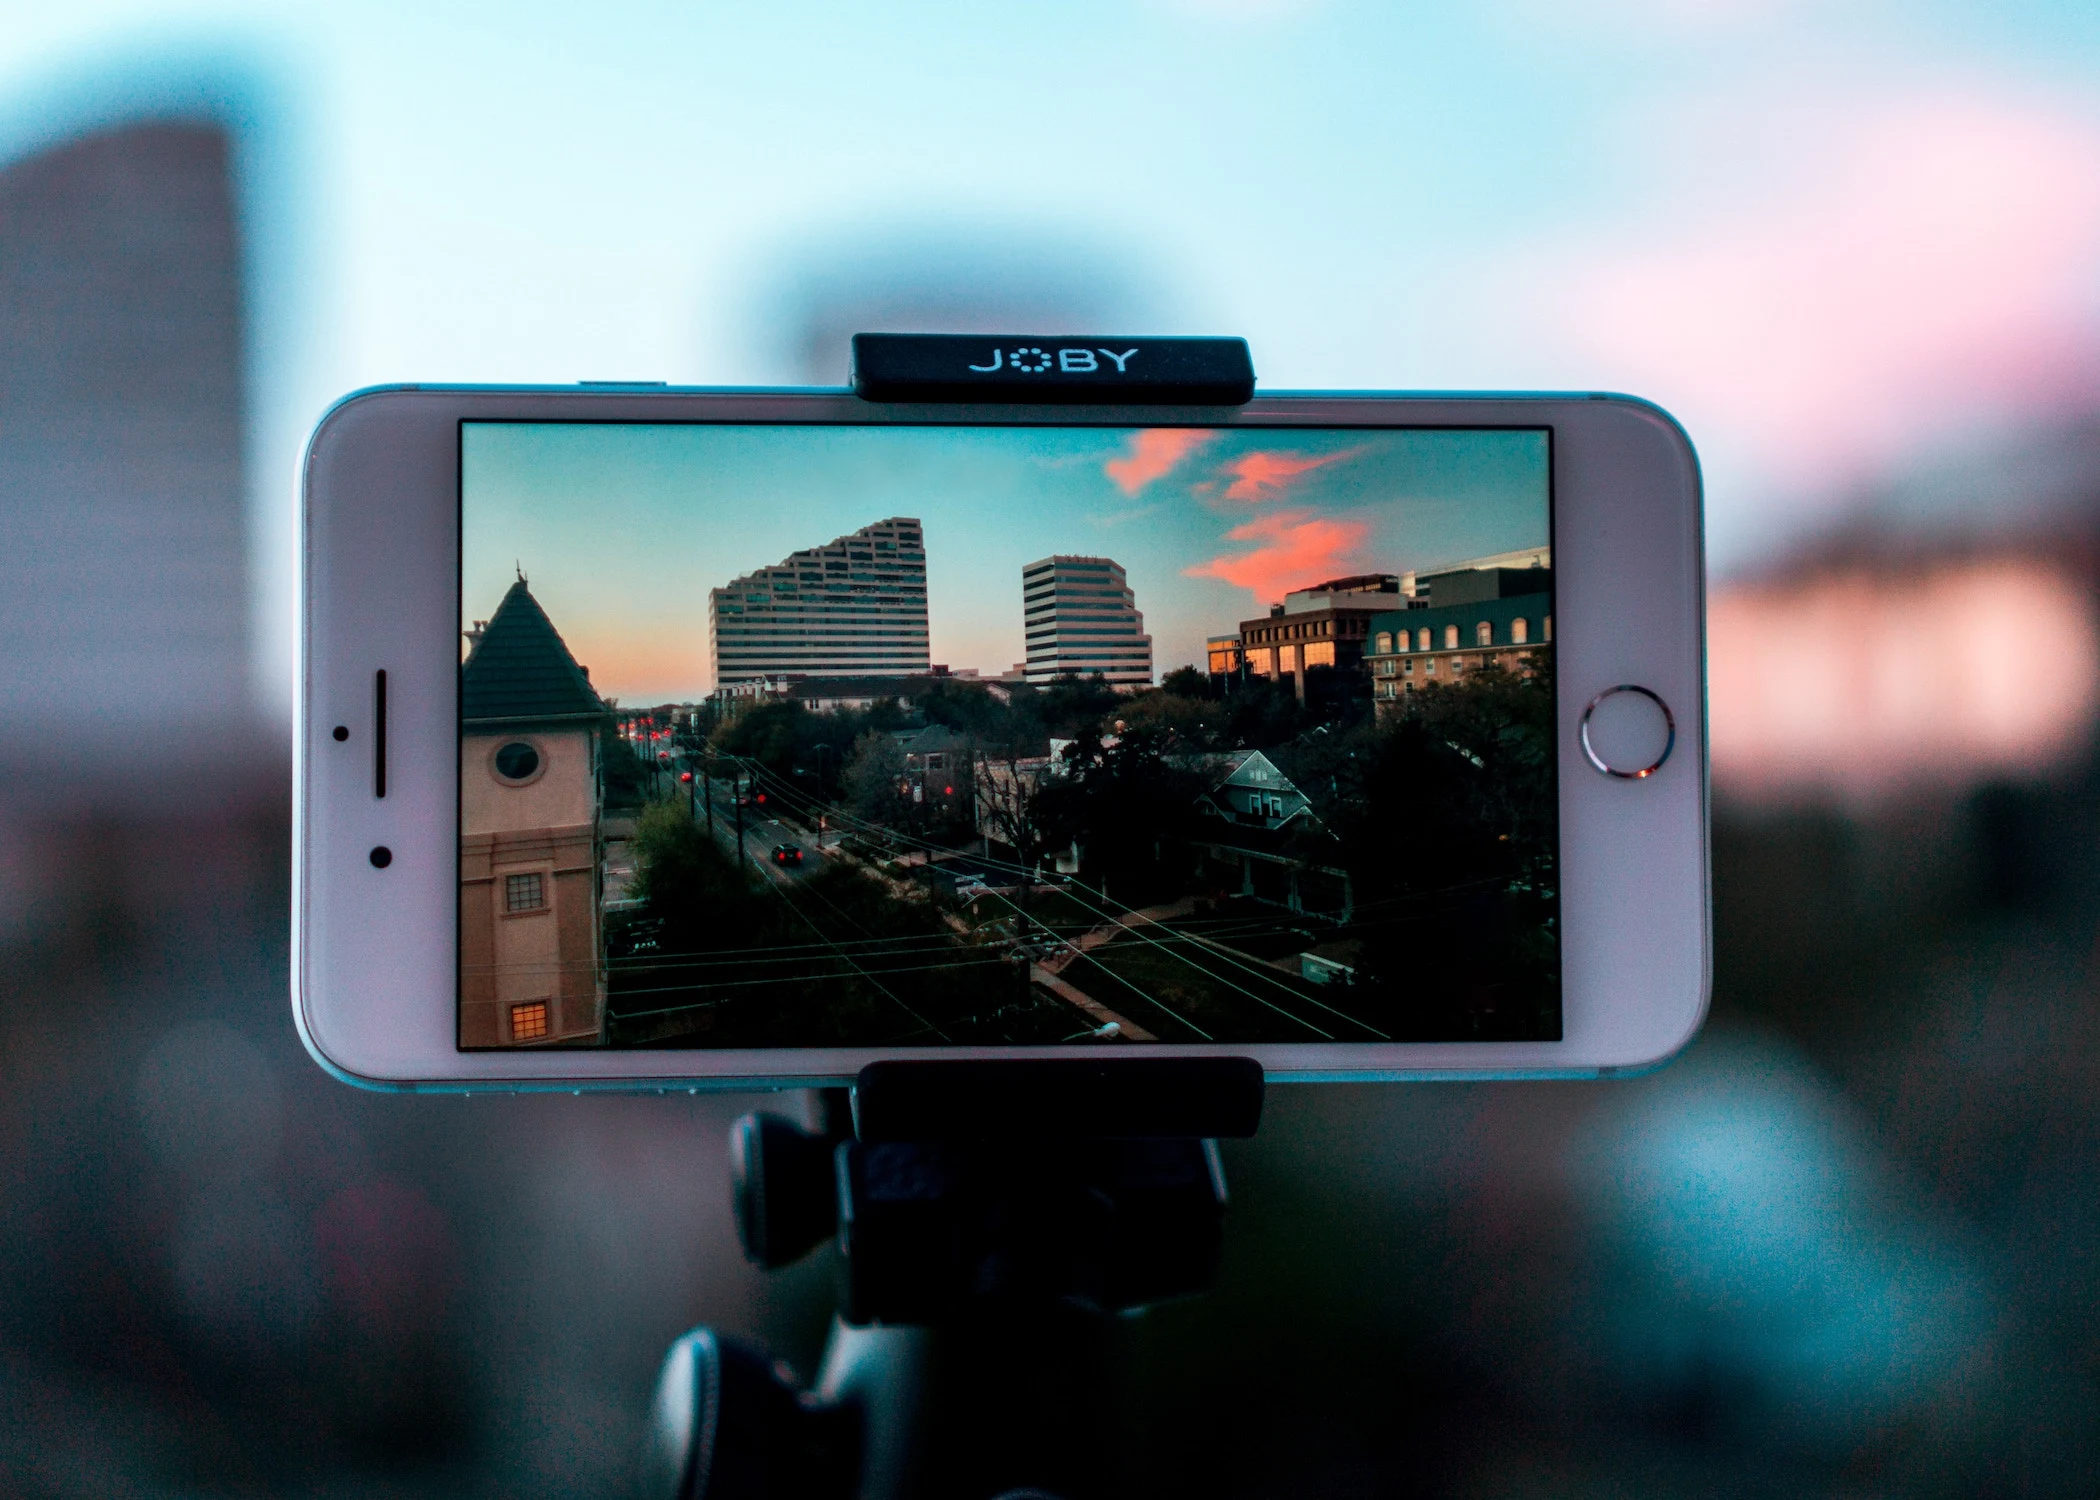 best settings for iphone video recording in high quality